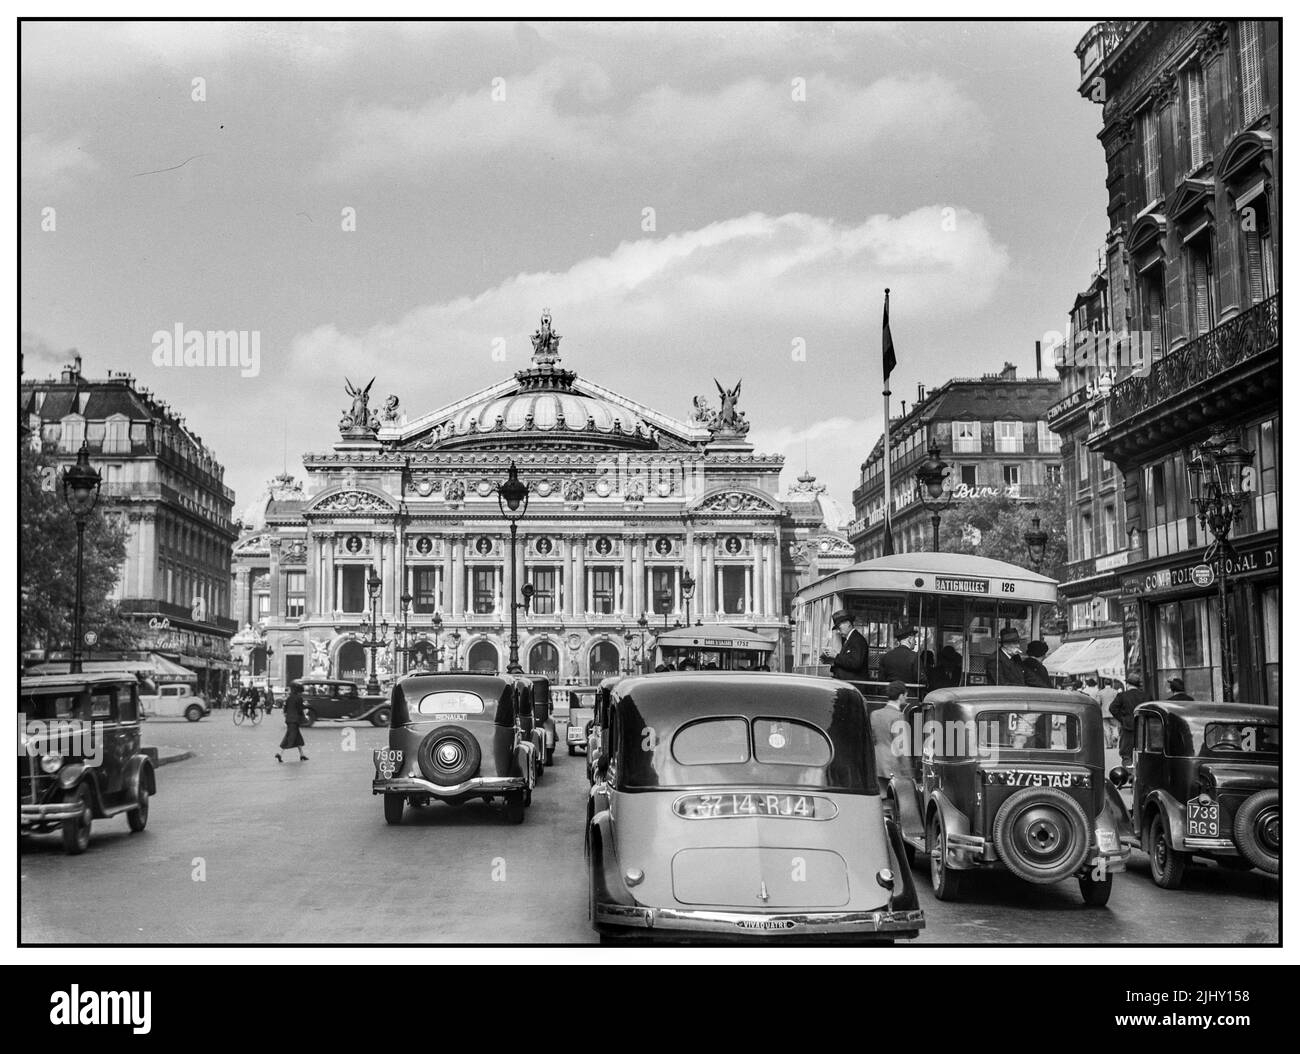 1930s Paris with Renault Taxis on ranks in forground with commuter Autobuses and  L'Opera behind busy with traffic and pedestrians Paris France Stock Photo